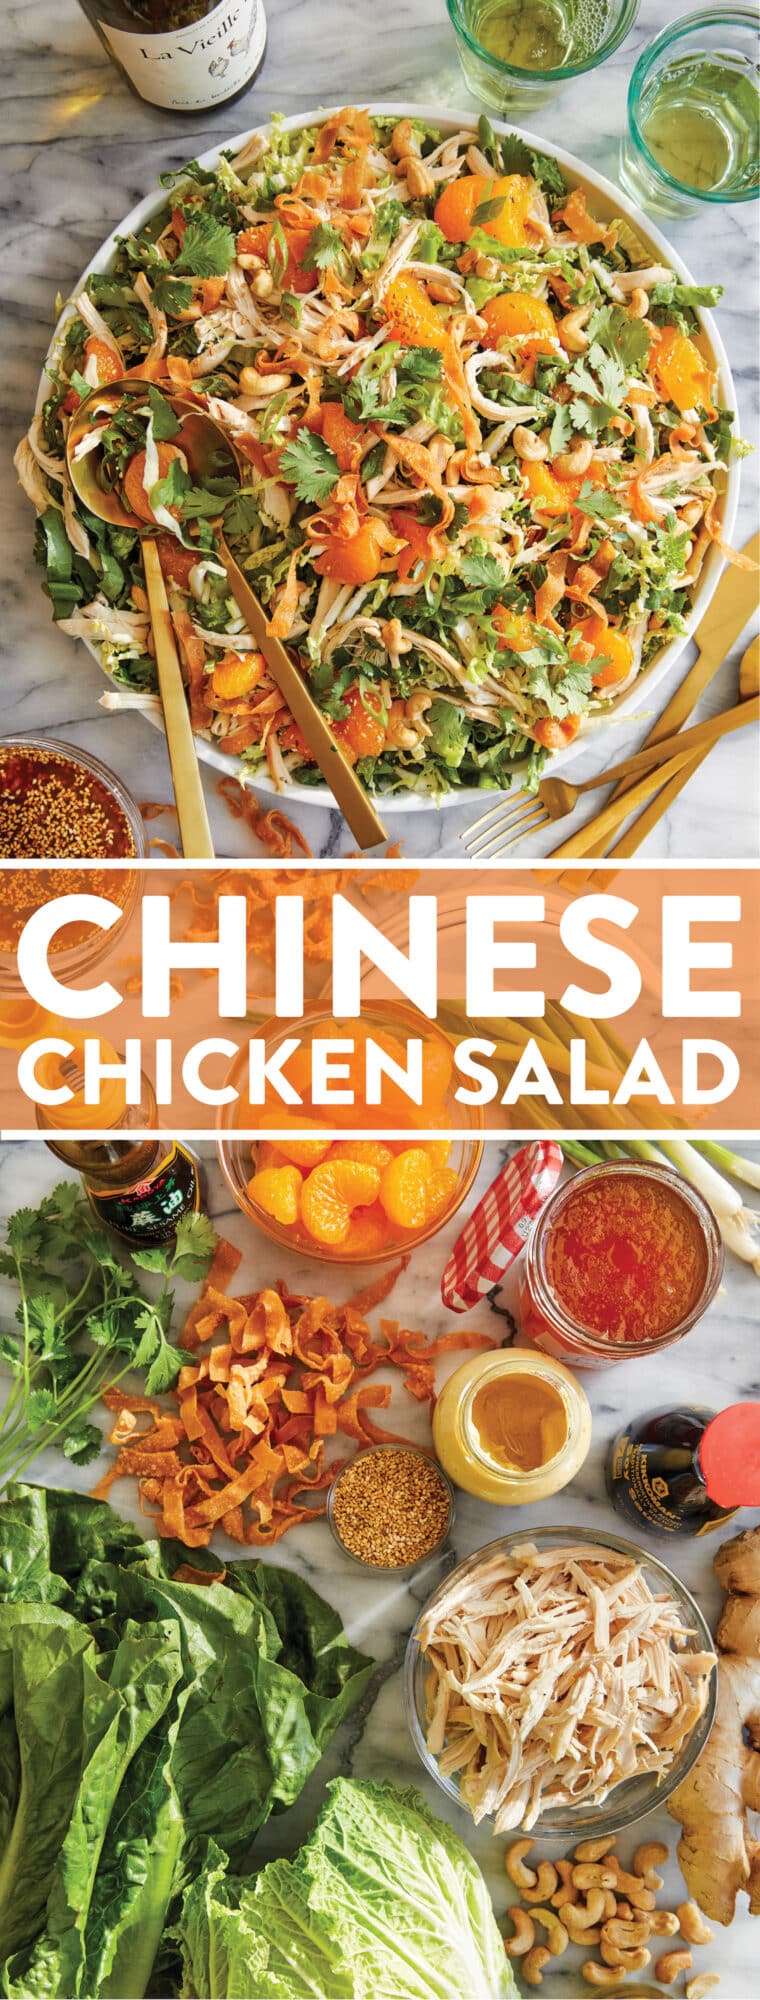 Chinese Chicken Salad - Made with leftover rotisserie chicken, romaine, napa, crispy wonton strips and the best sesame ginger dressing ever!